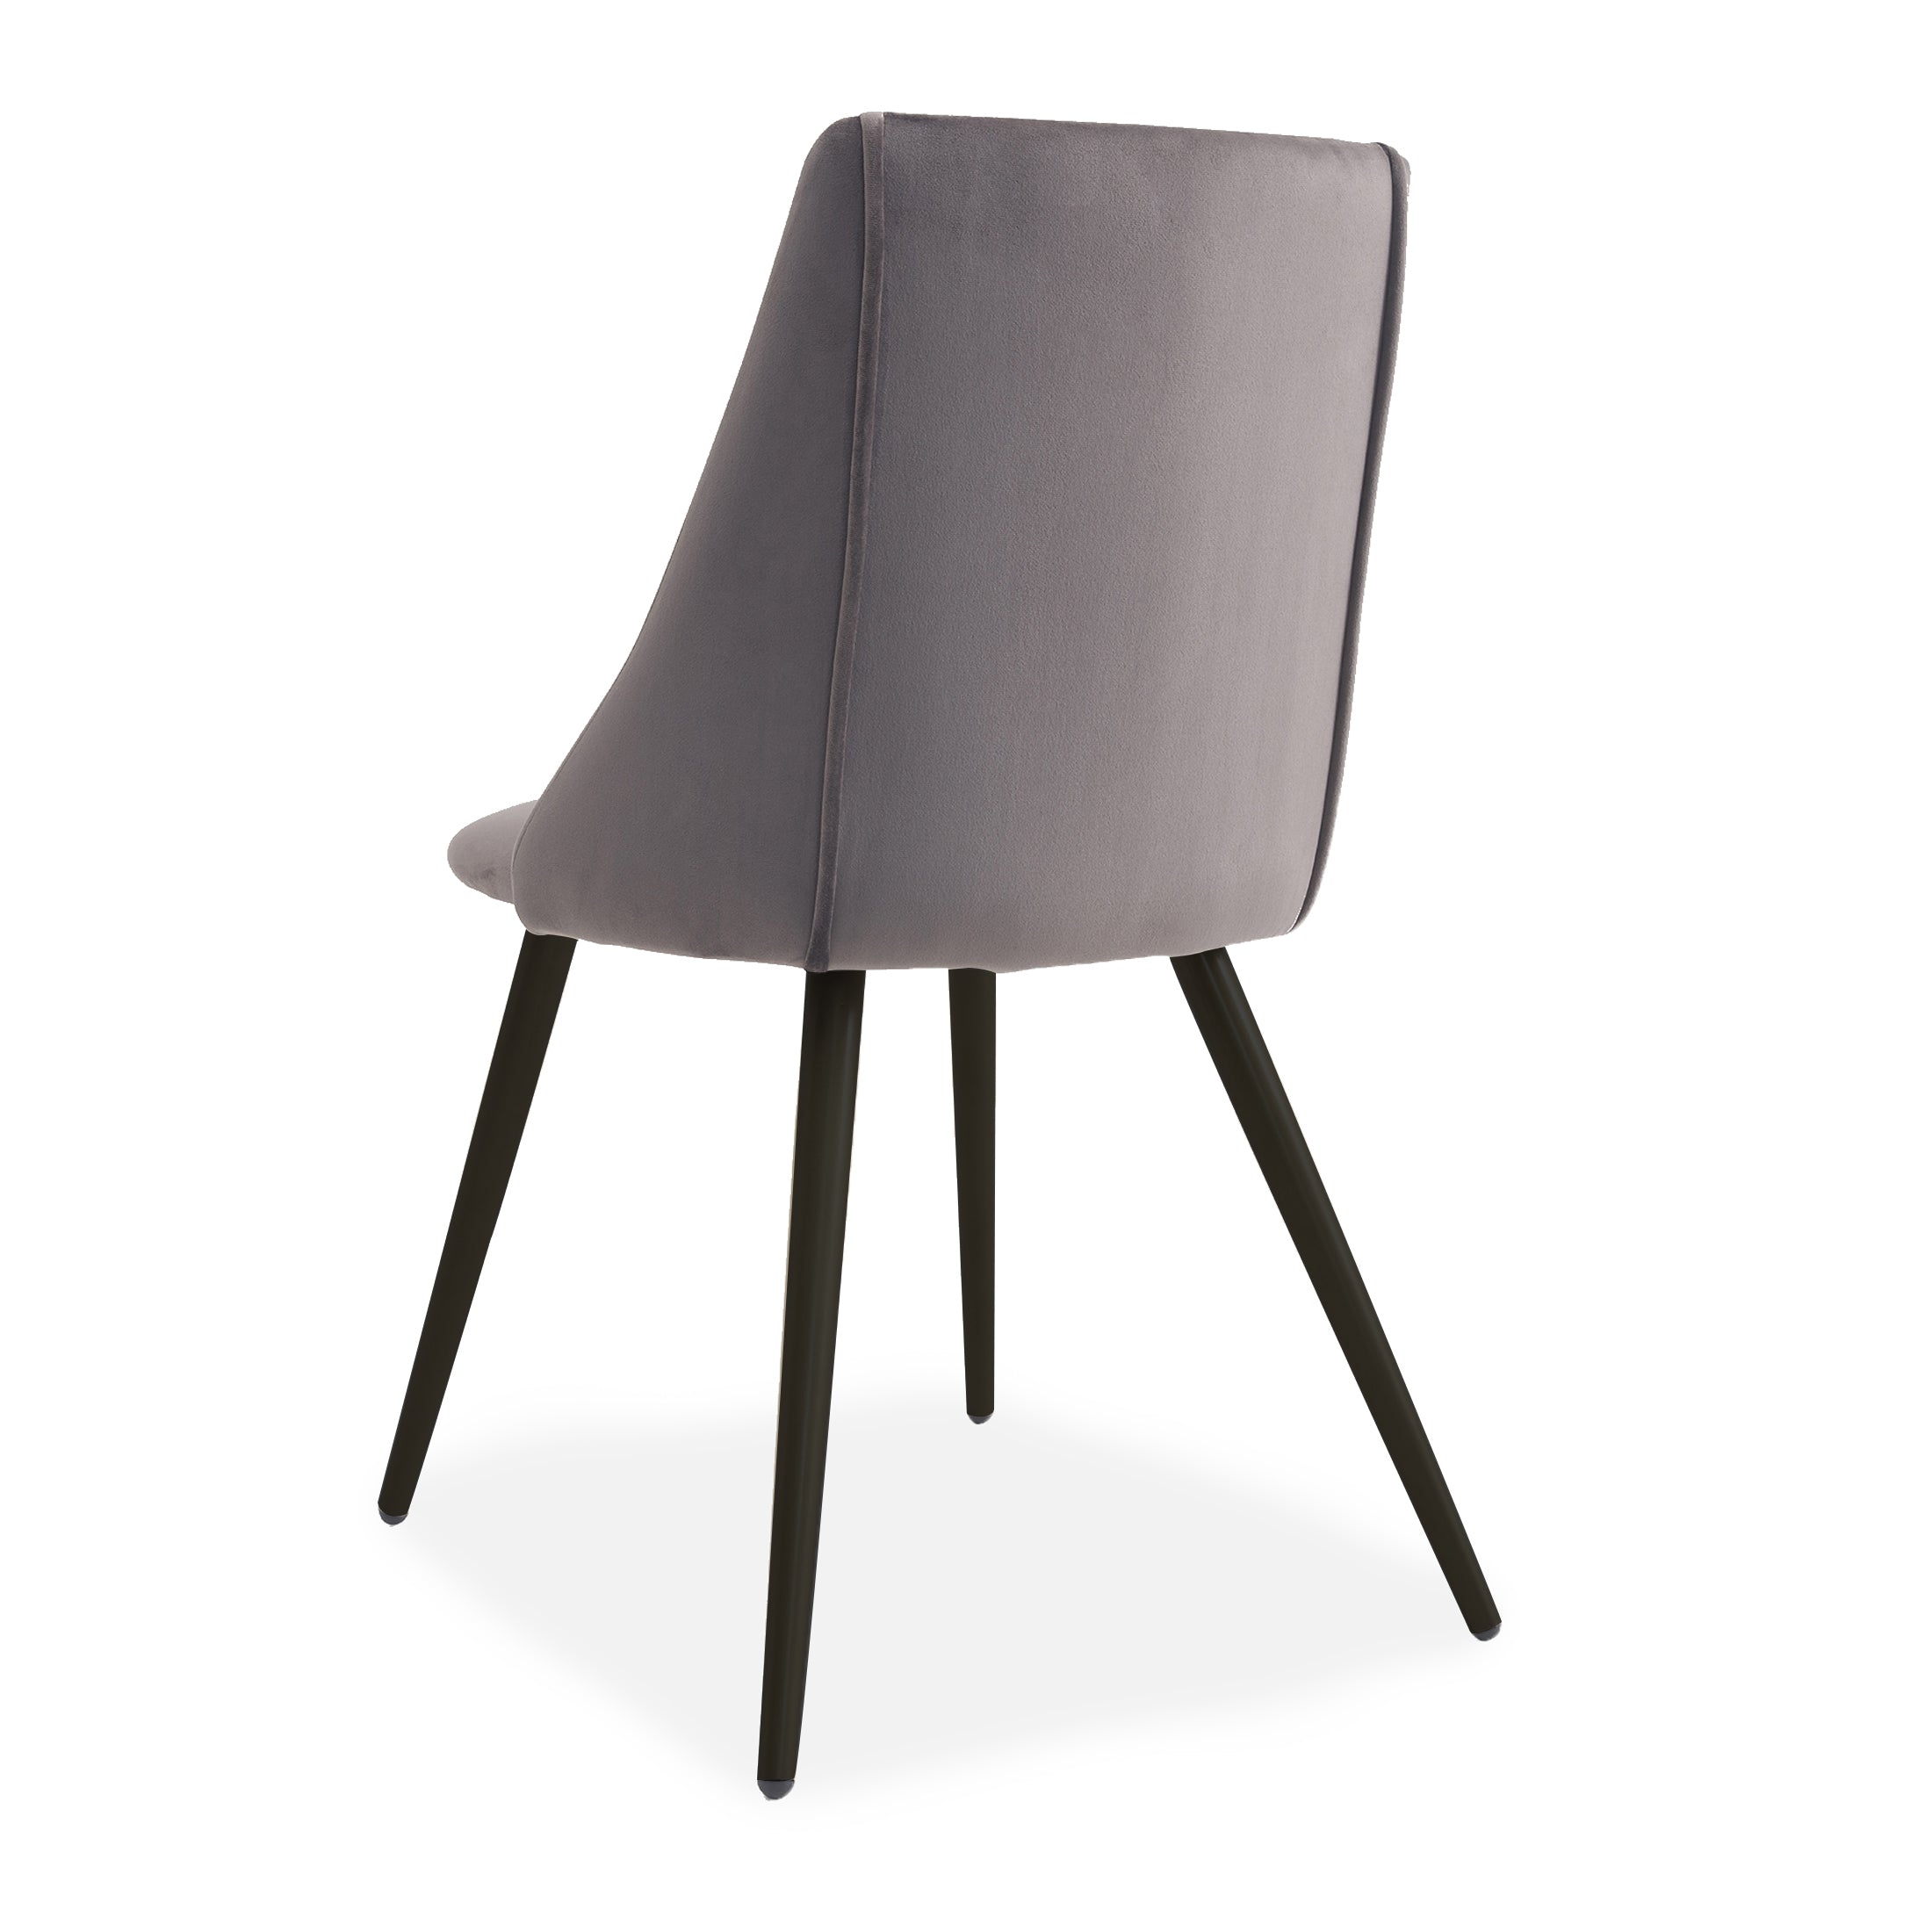 Grey Ferrier Dining Chairs (2 Pack)